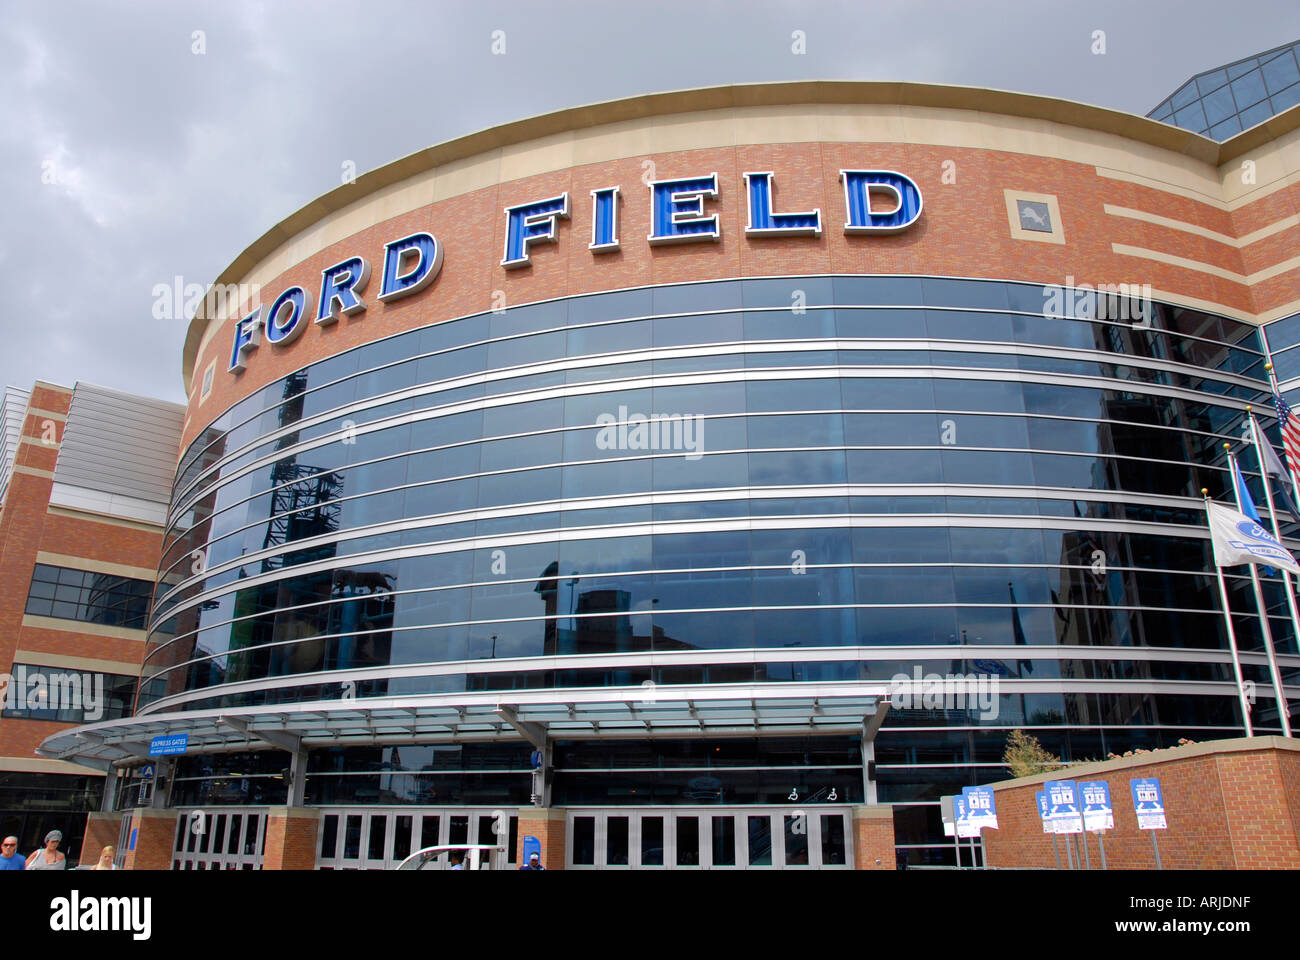 Ford Field entrance home of the professional football team Detroit Lions in Detroit Michigan MI Stock Photo